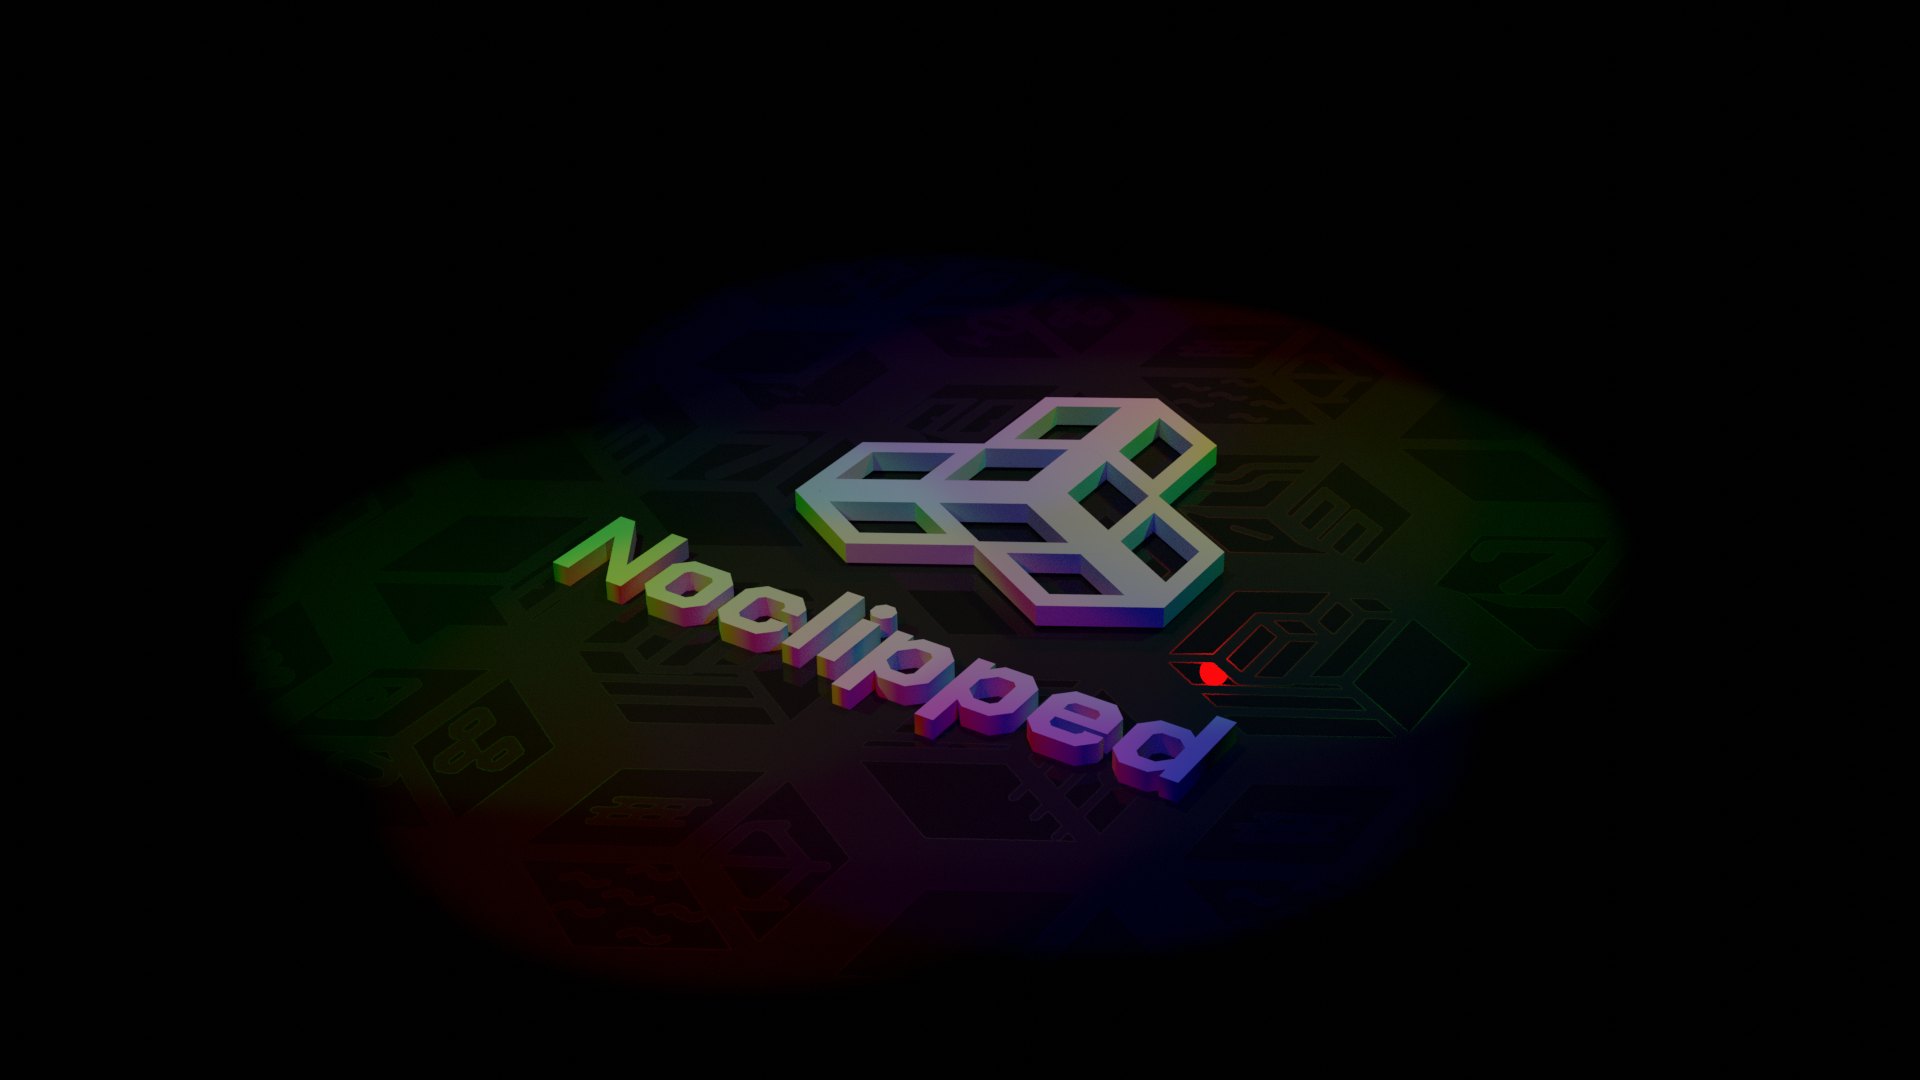 Noclipped on Steam